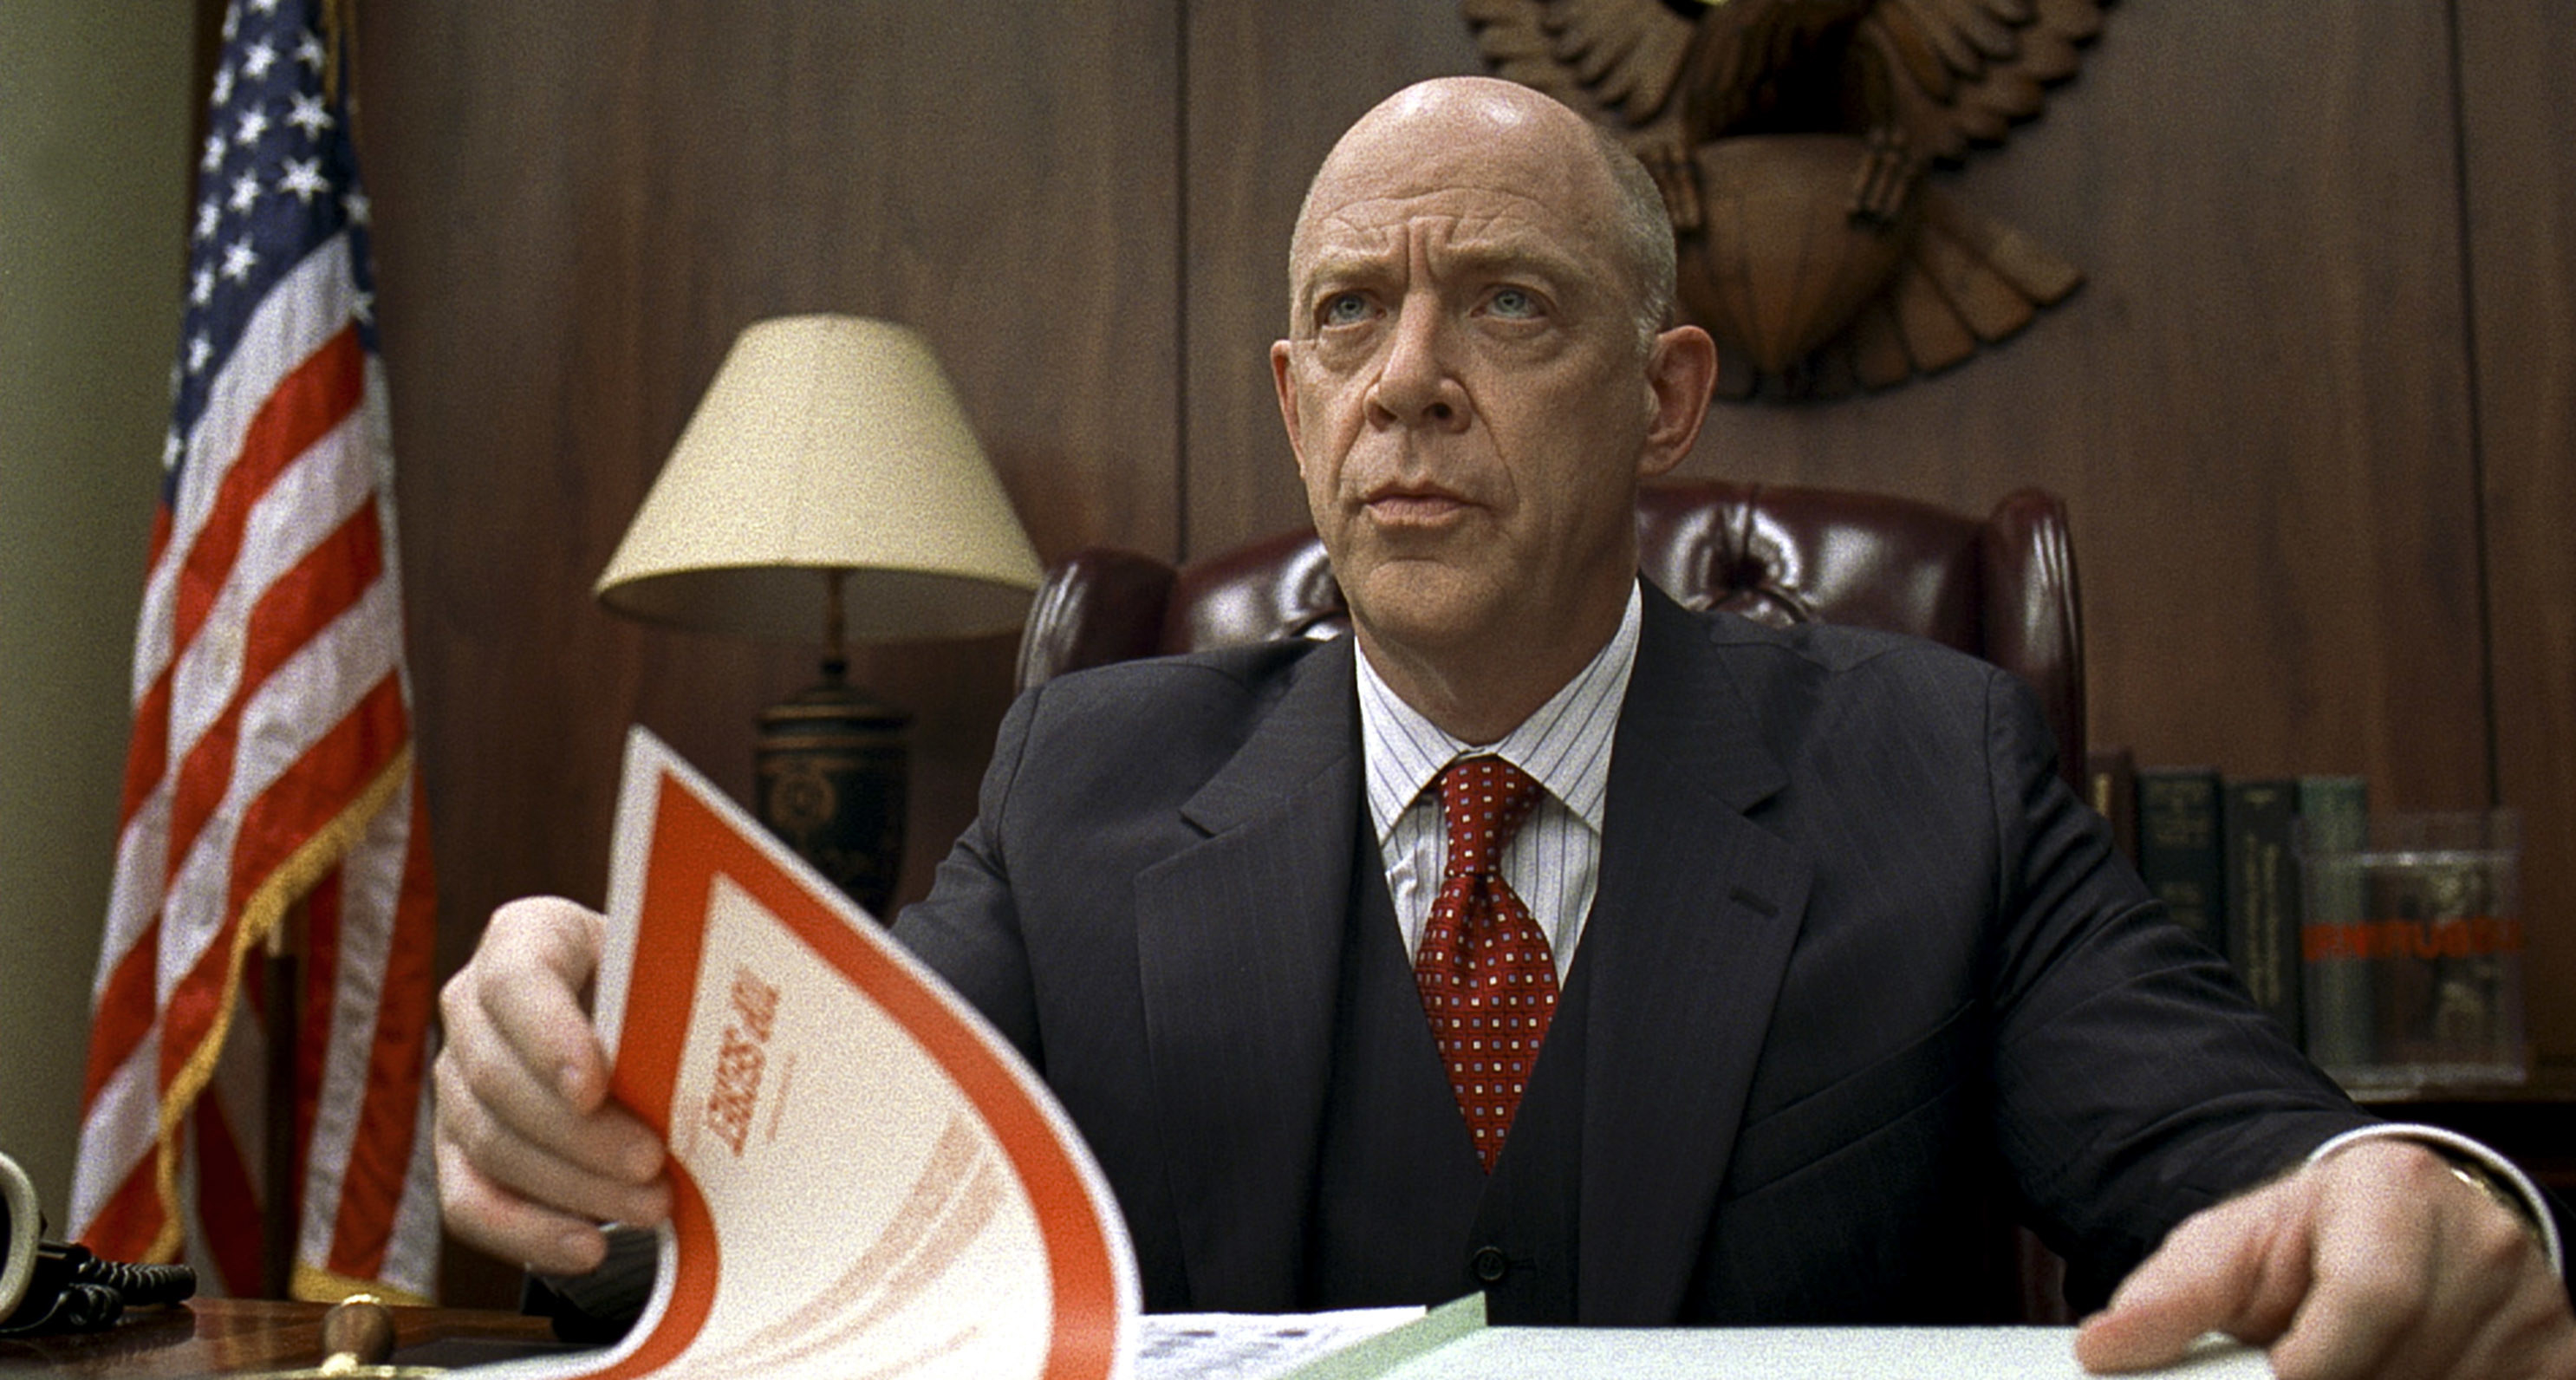 JK Simmons in a suit sitting in a large leather office chair in an offie looking serious